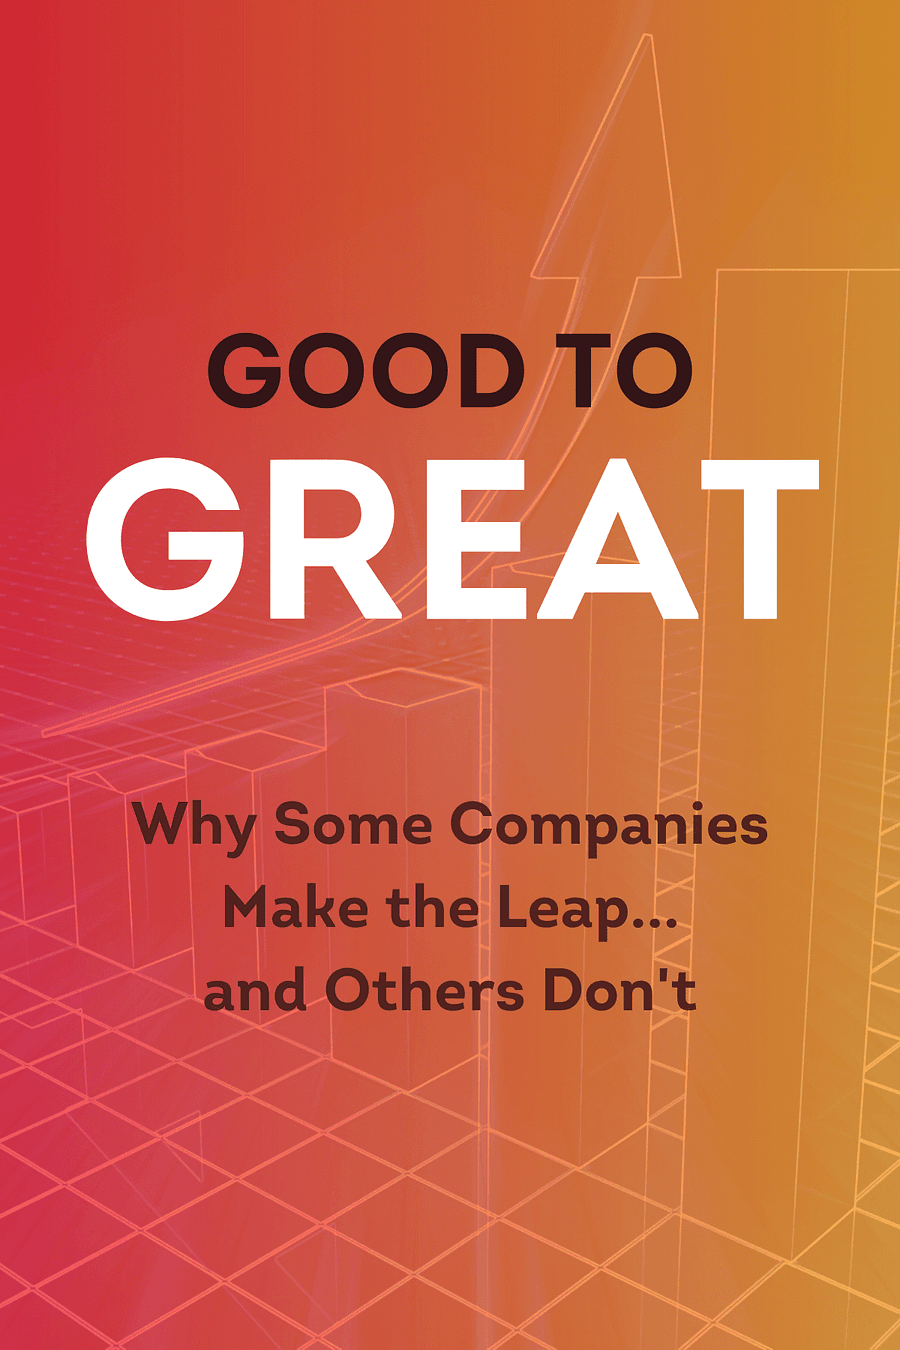 Good to Great by Jim Collins - Book Summary